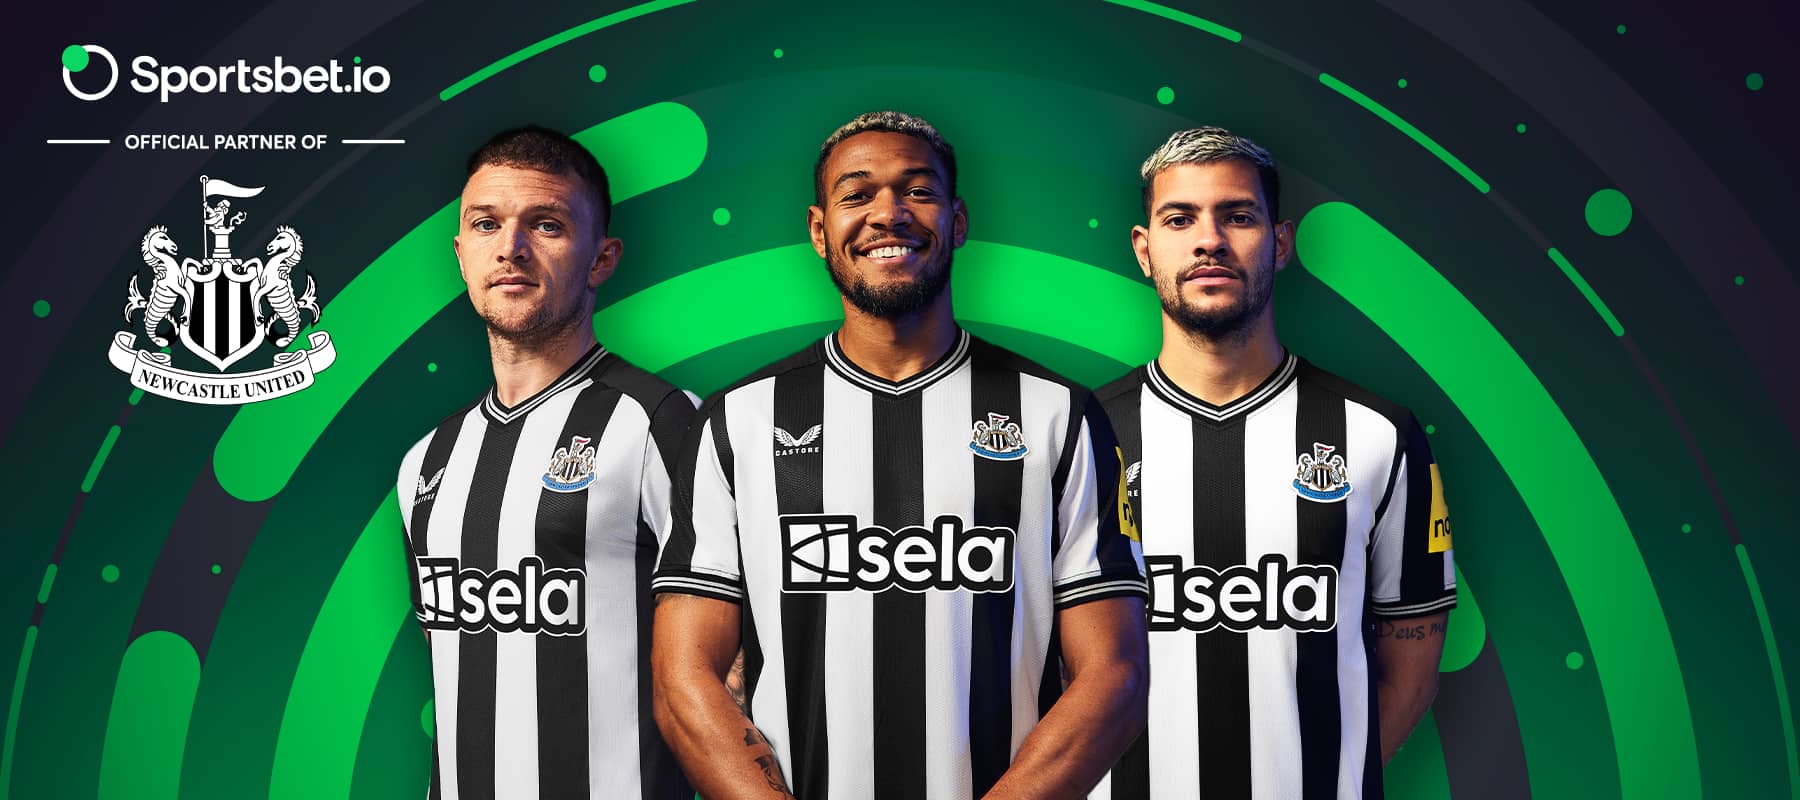 Shooting for higher heights: Sportsbet.io and Newcastle United’s partnership